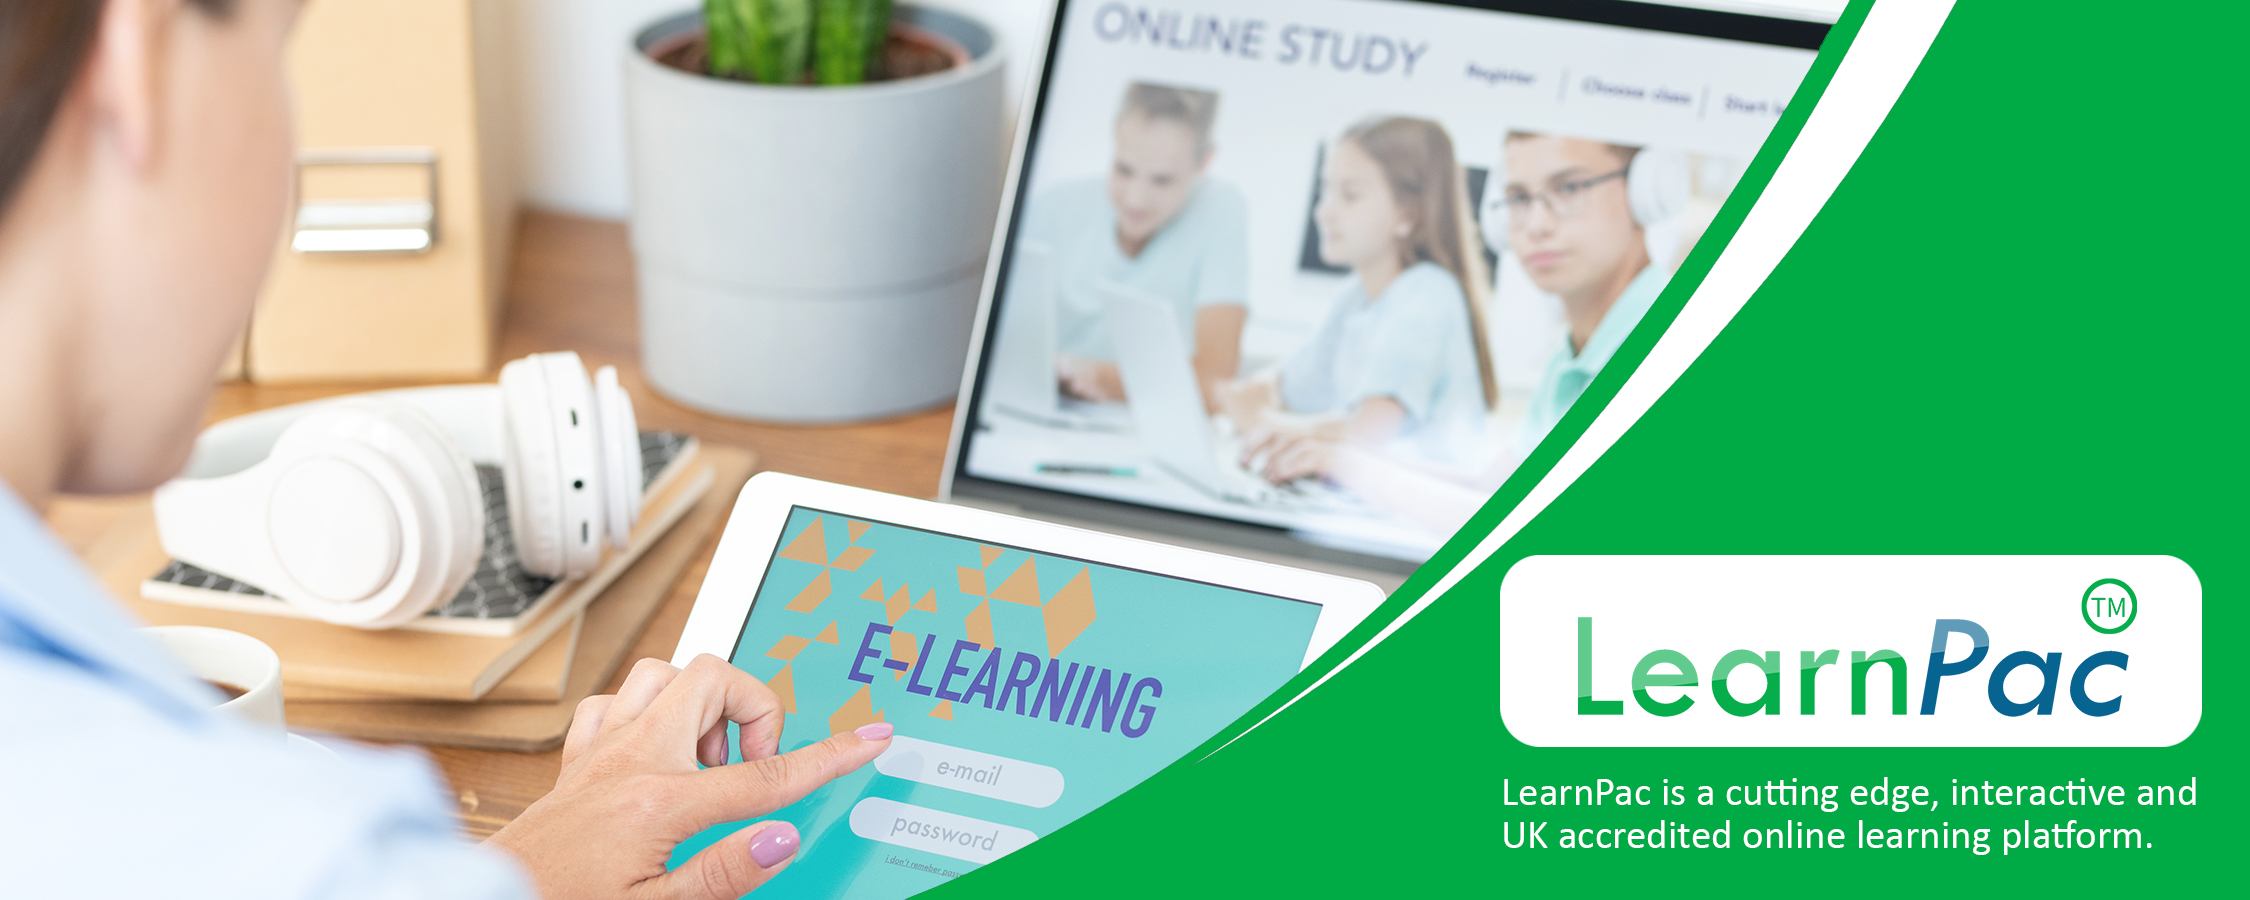 Mandatory Training for Care Staff & Care Workers - Online Learning Courses - E-Learning Courses - LearnPac Systems UK -